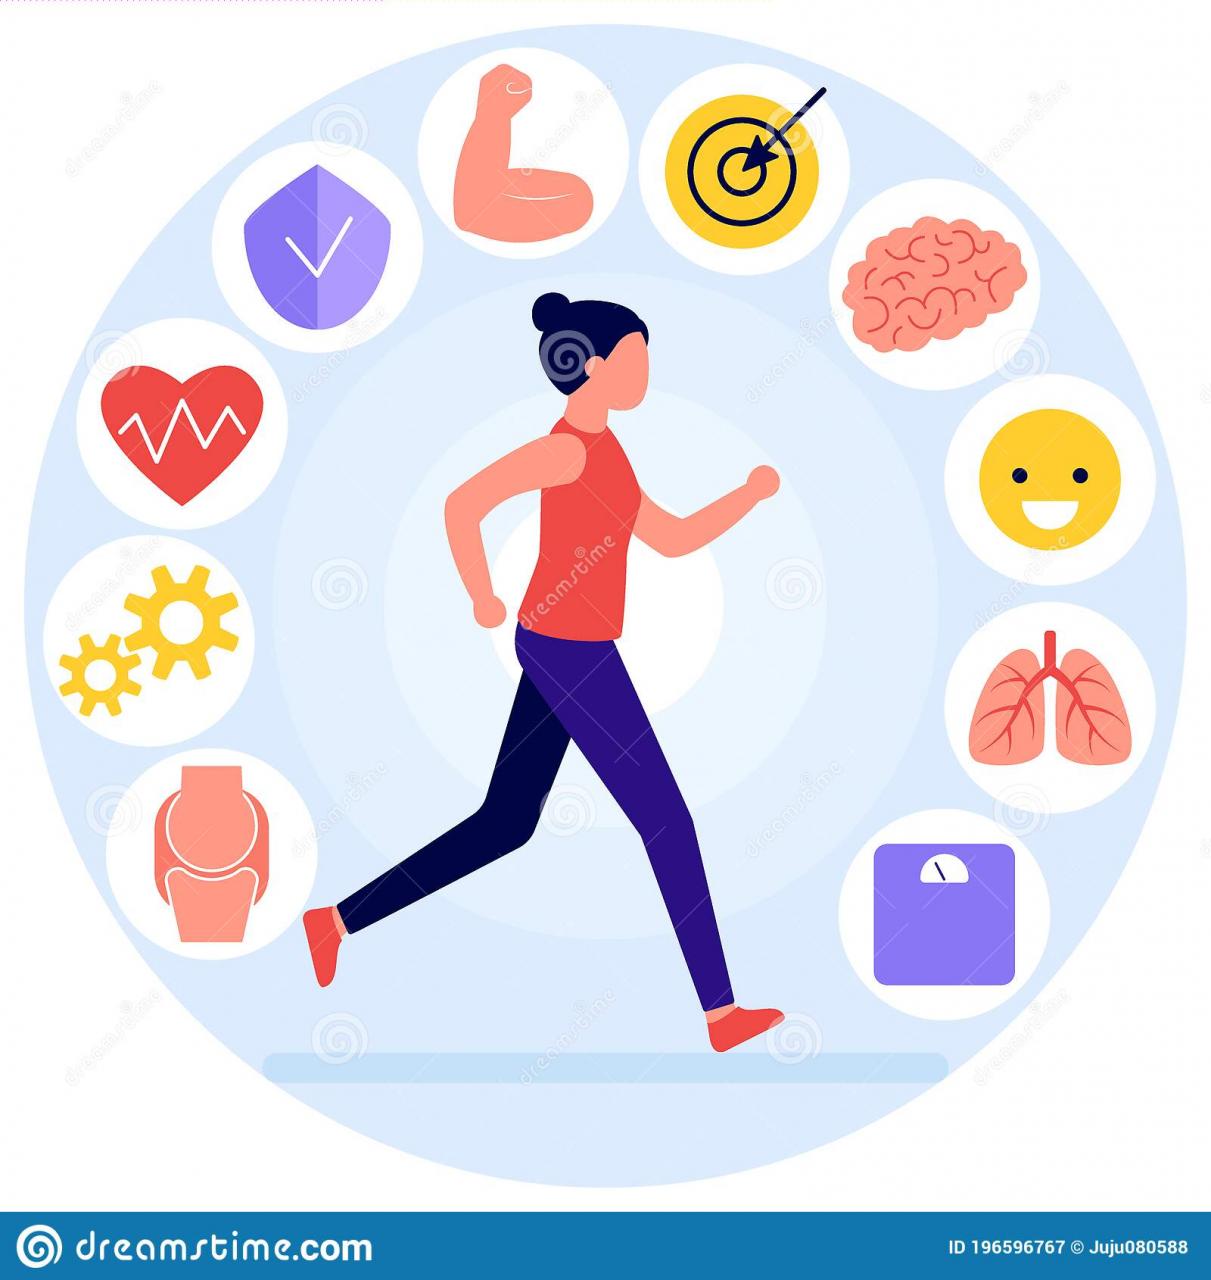 Positive Effects Of Exercise On The Brain